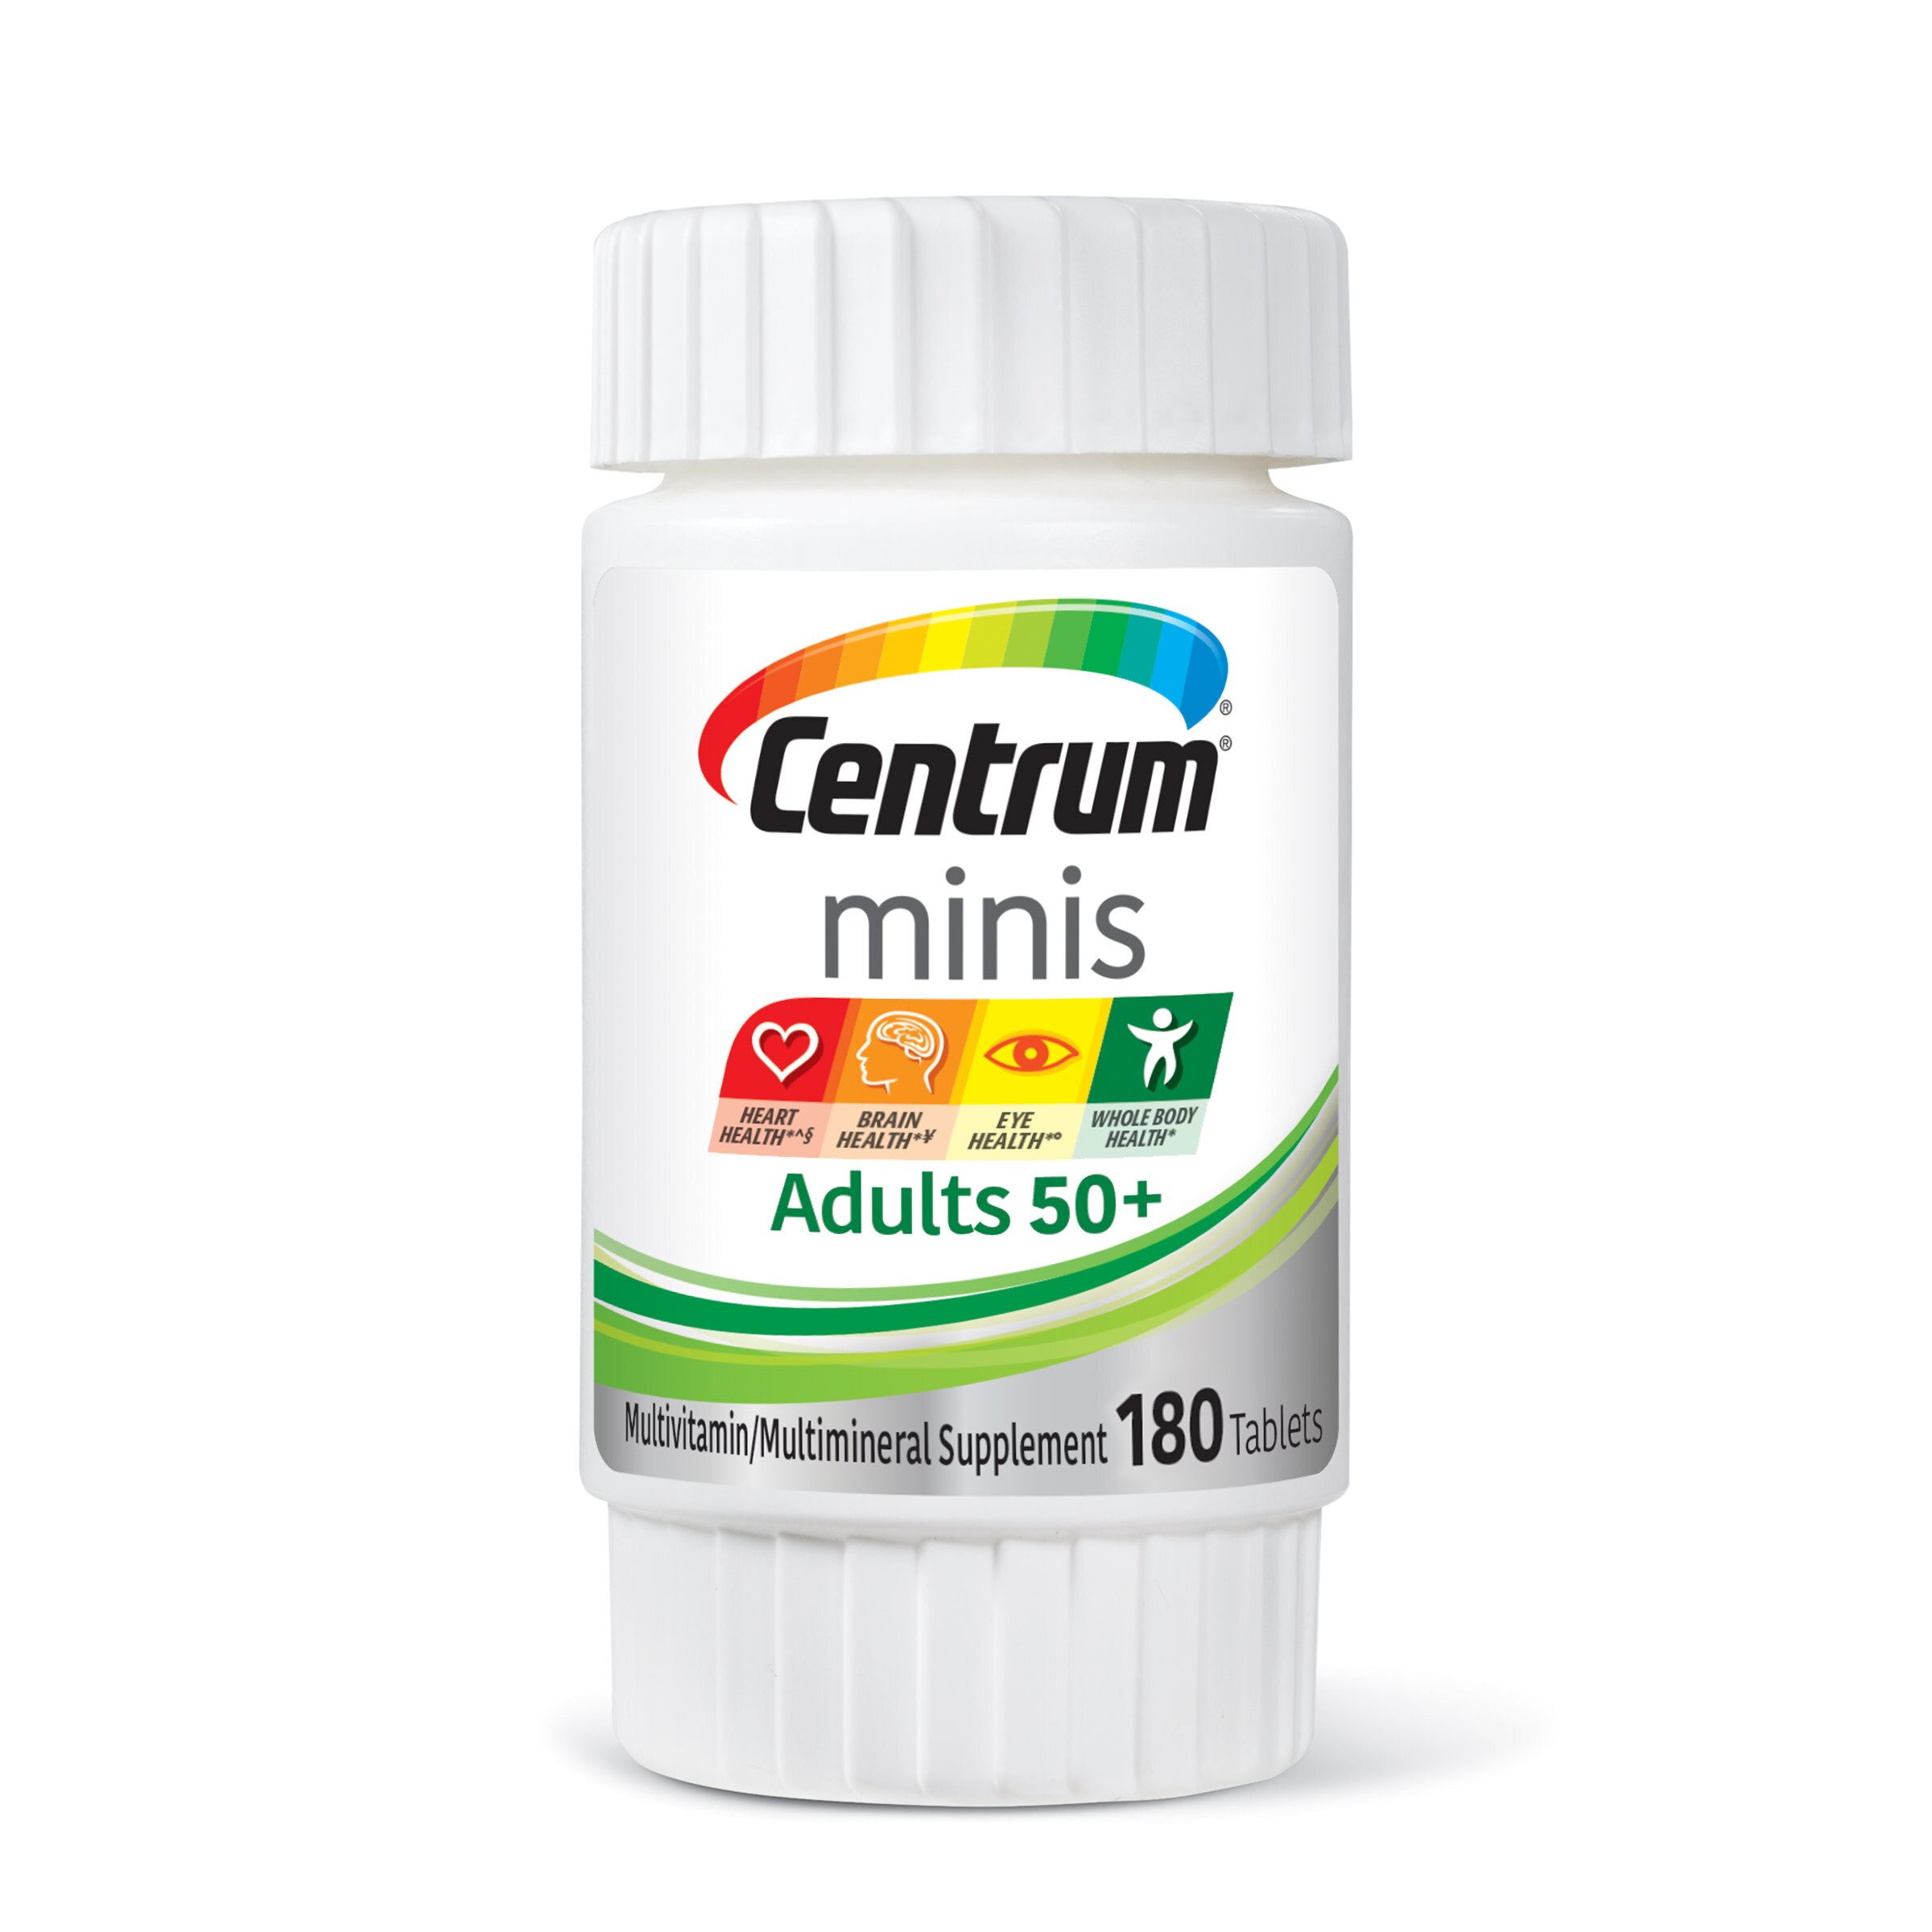 Centrum Minis Adults 50+ Multivitamin Tablets, 180 CT